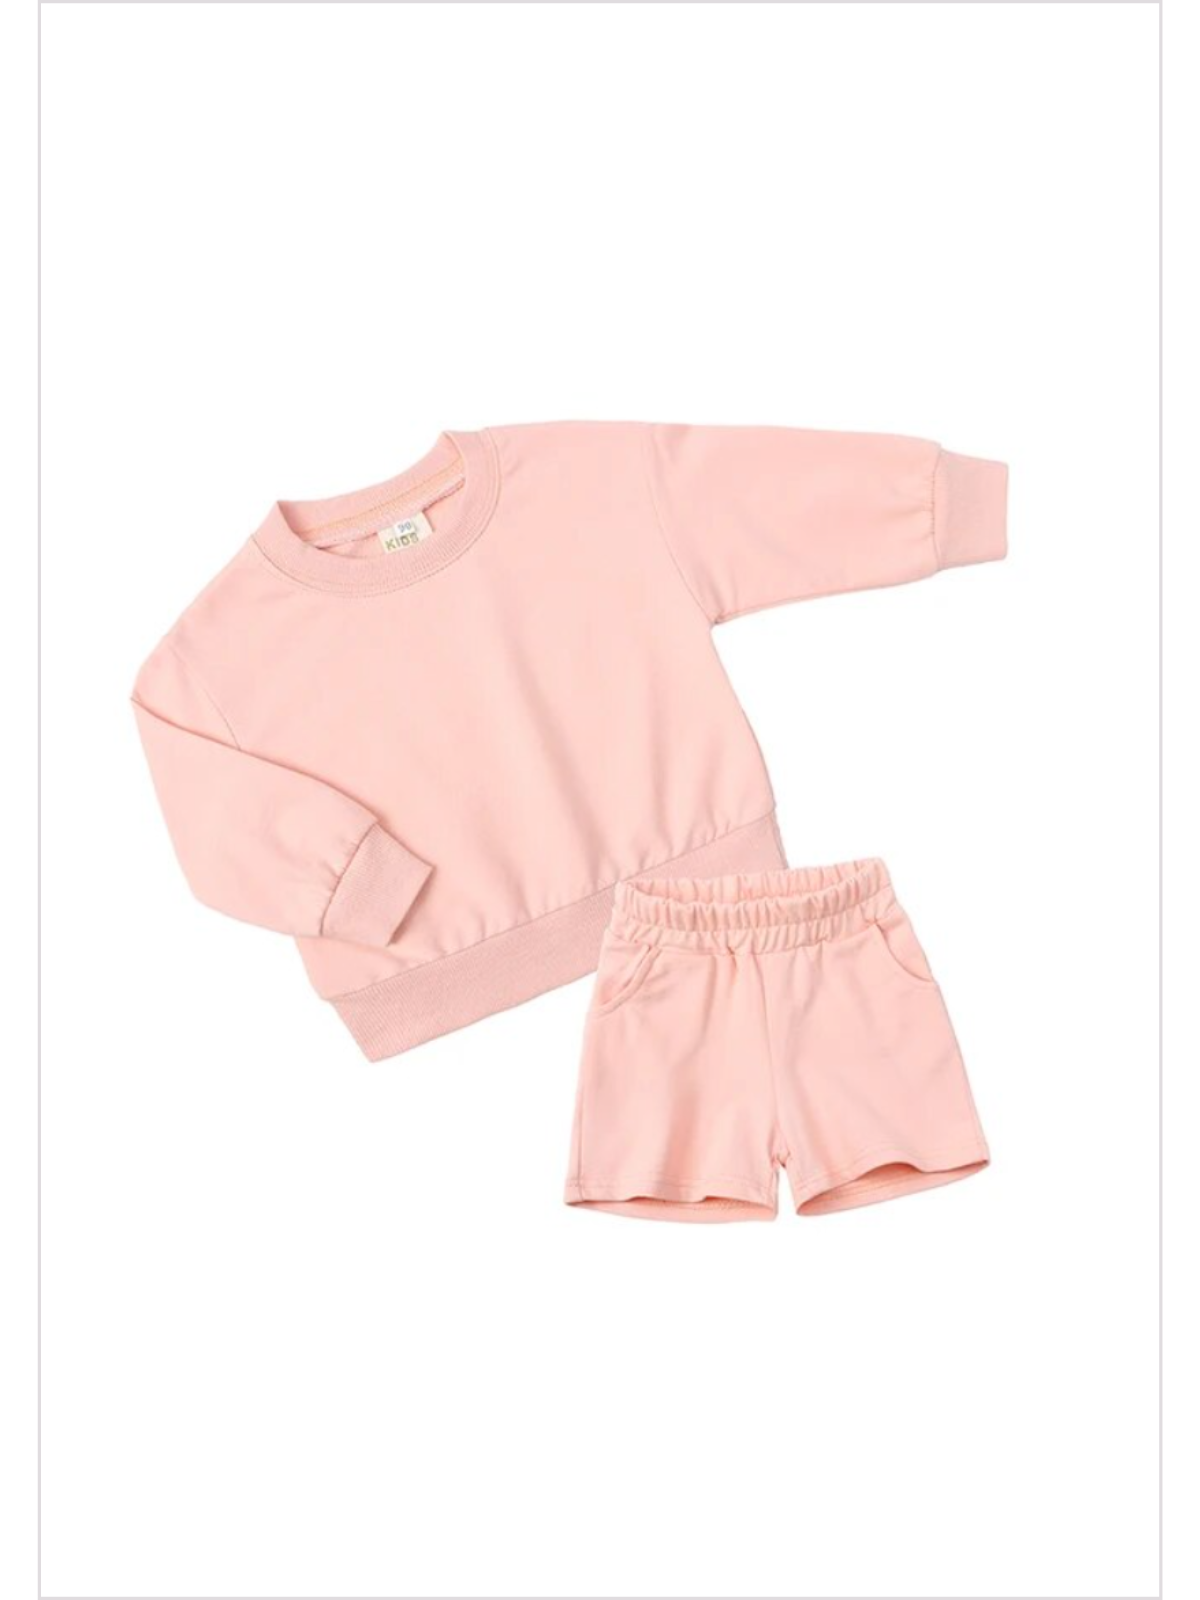 Boys Tracksuit Short Set | Mia Belle Girls Spring Outfits